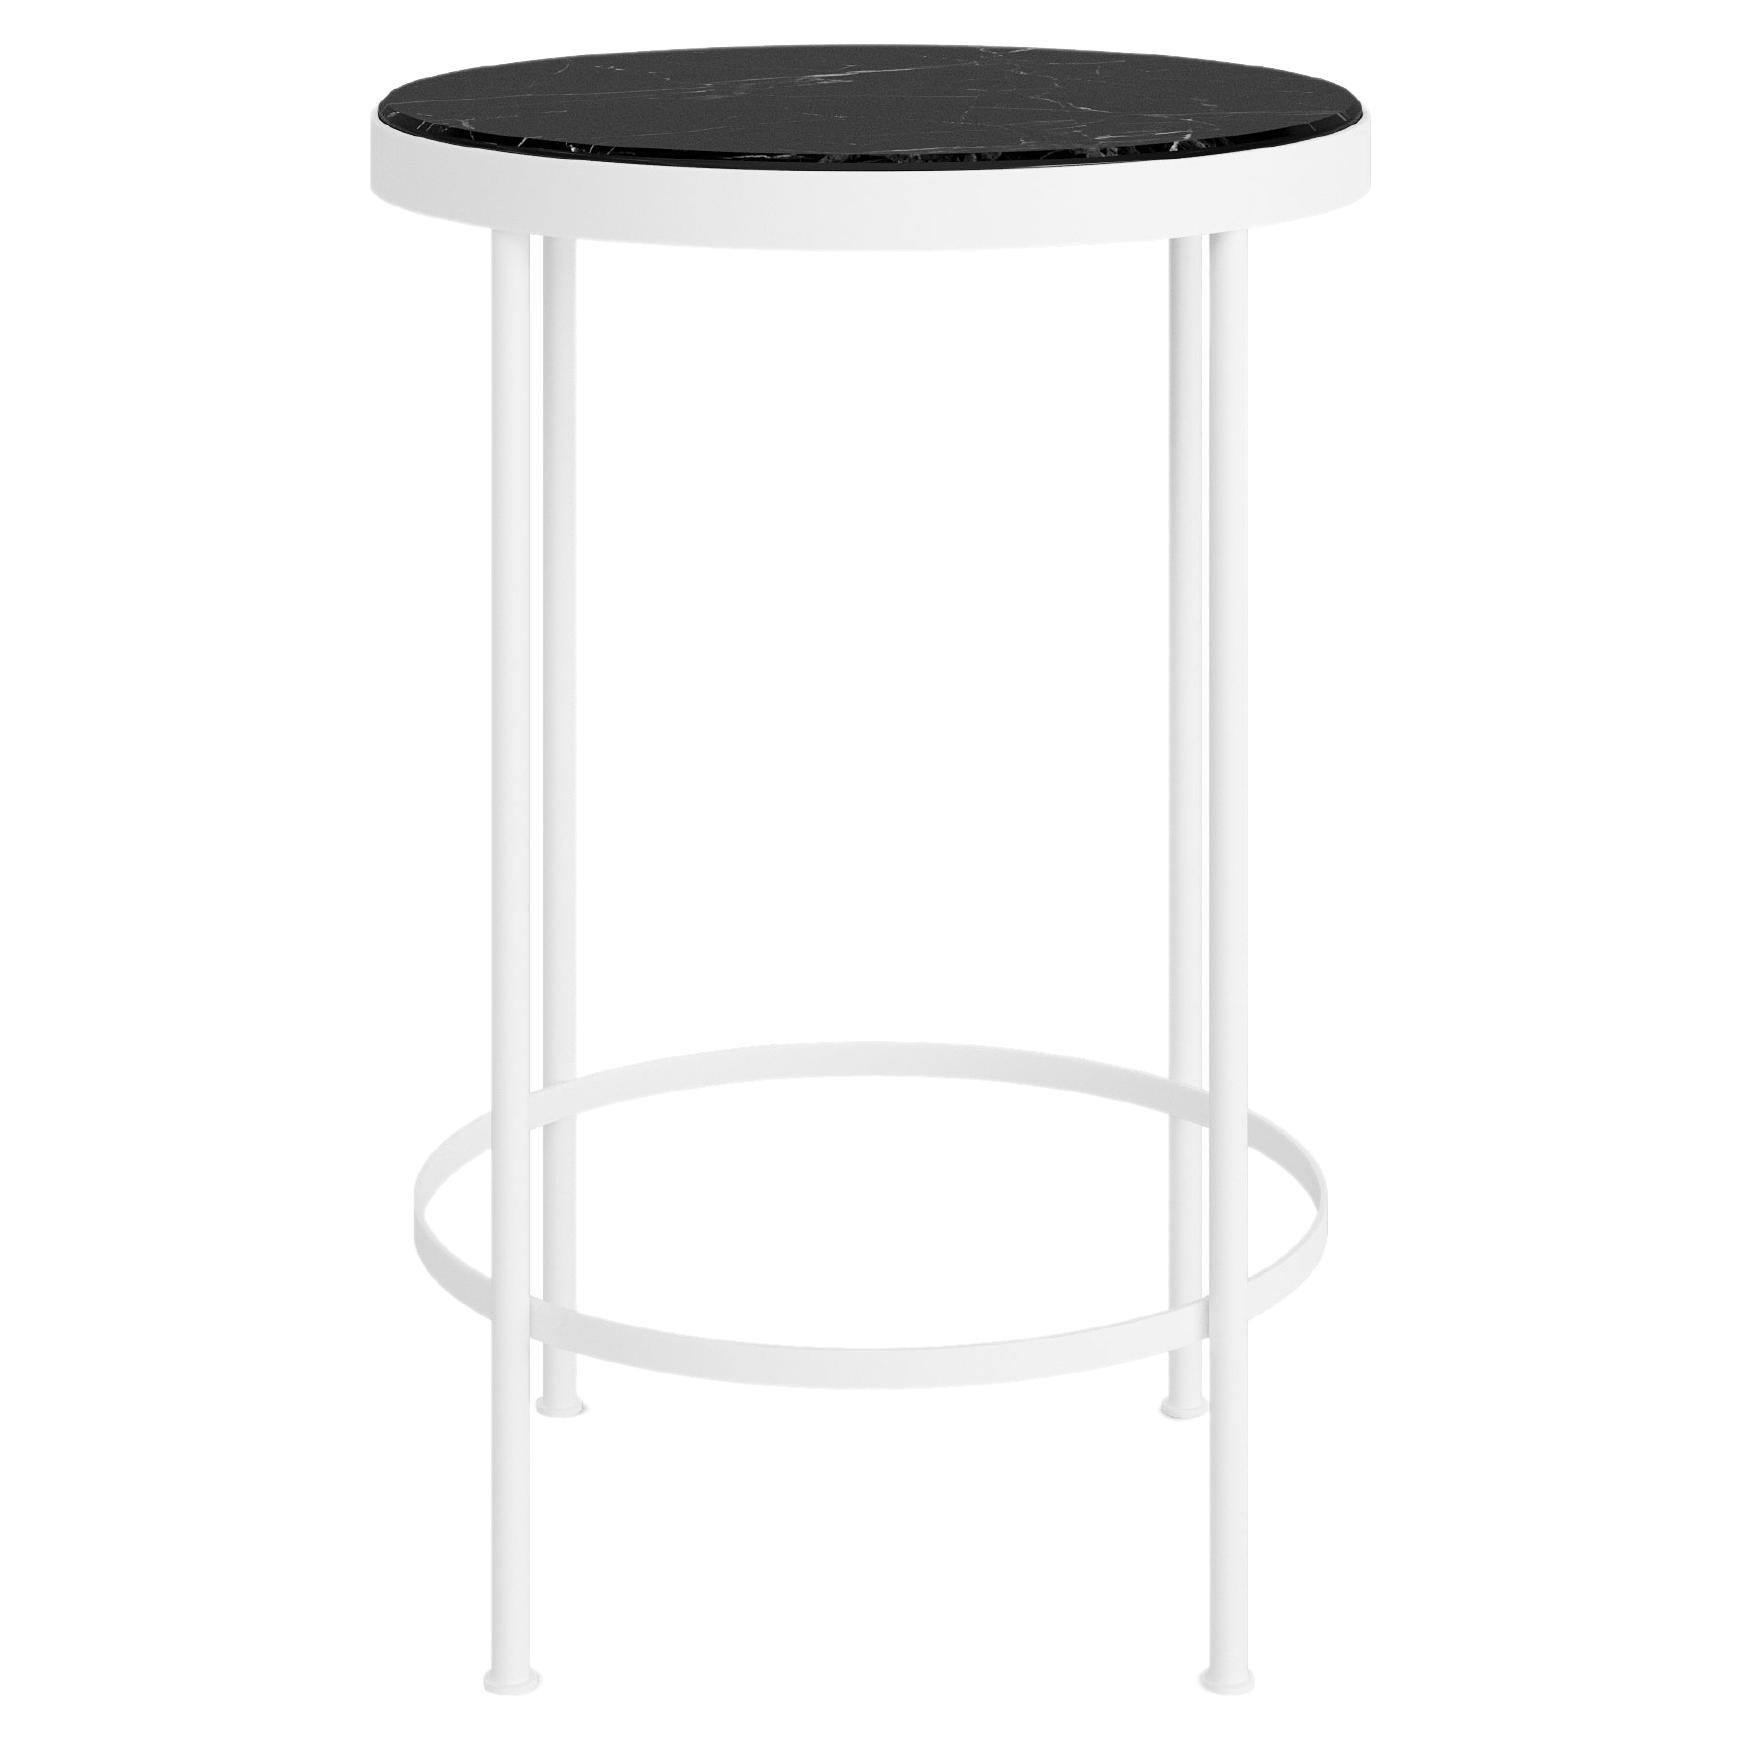 Contemporary Outdoor Bar Table in Nero Marquina Marble with Black Lacquered Legs